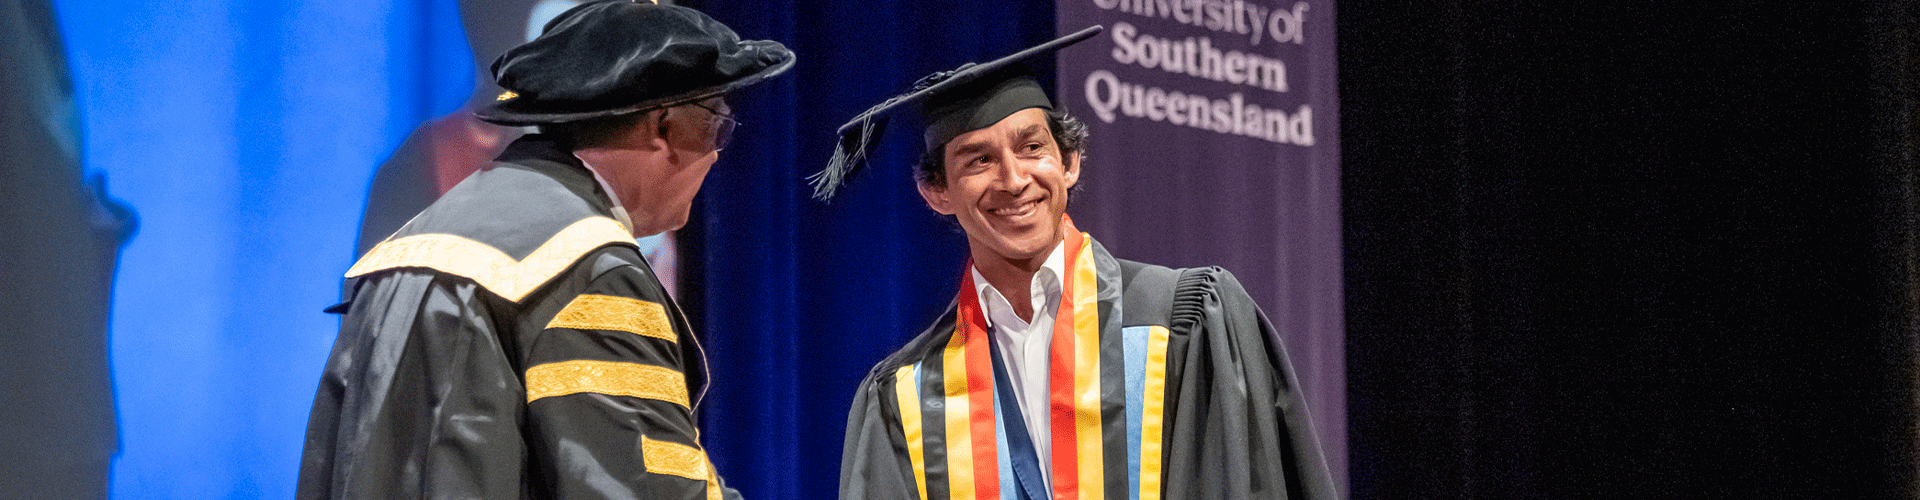 Johnathan Thurston AM was awarded Fellow of the University by Chancellor John Dornbusch at a University of Southern Queensland graduation ceremony in Toowoomba yesterday.